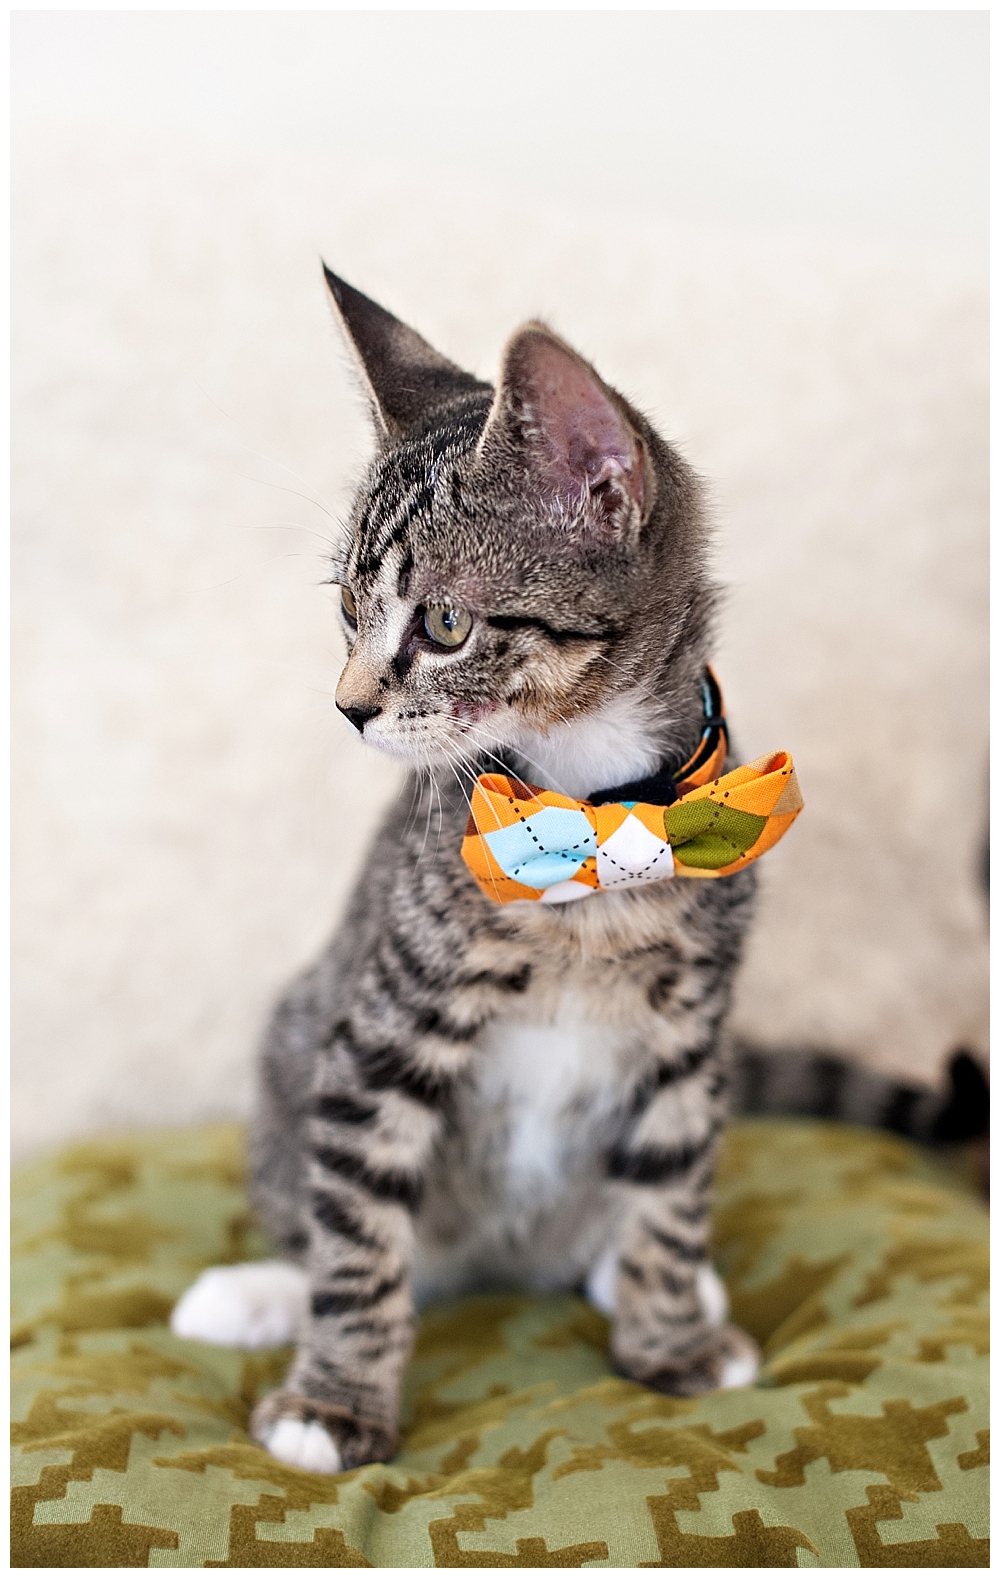 tiger striped kitten with a bow tie